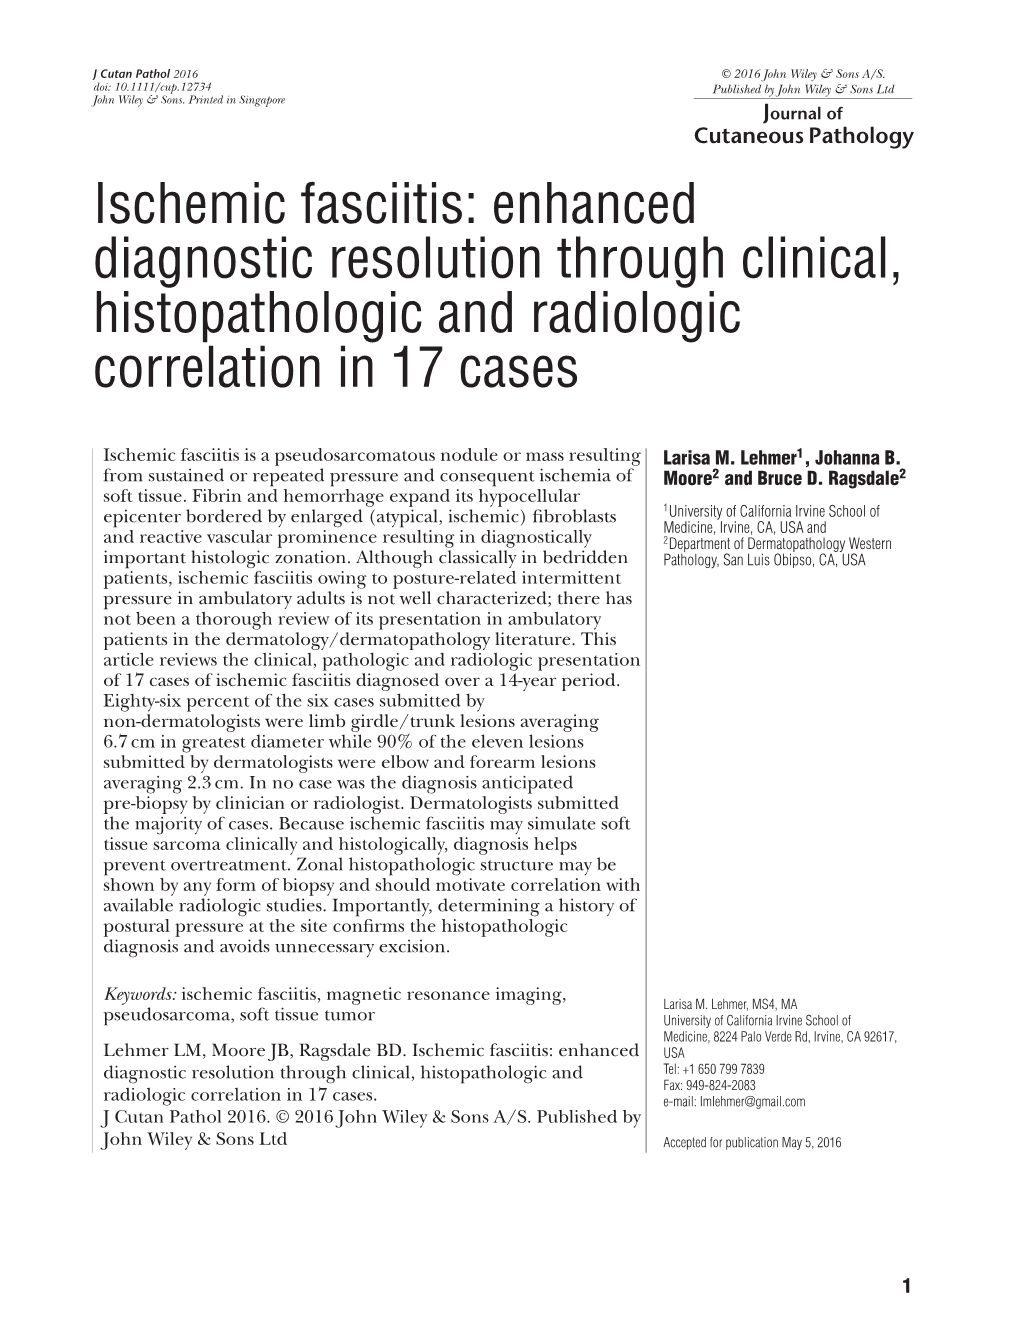 Ischemic Fasciitis: Enhanced Diagnostic Resolution Through Clinical, Histopathologic and Radiologic Correlation in 17 Cases